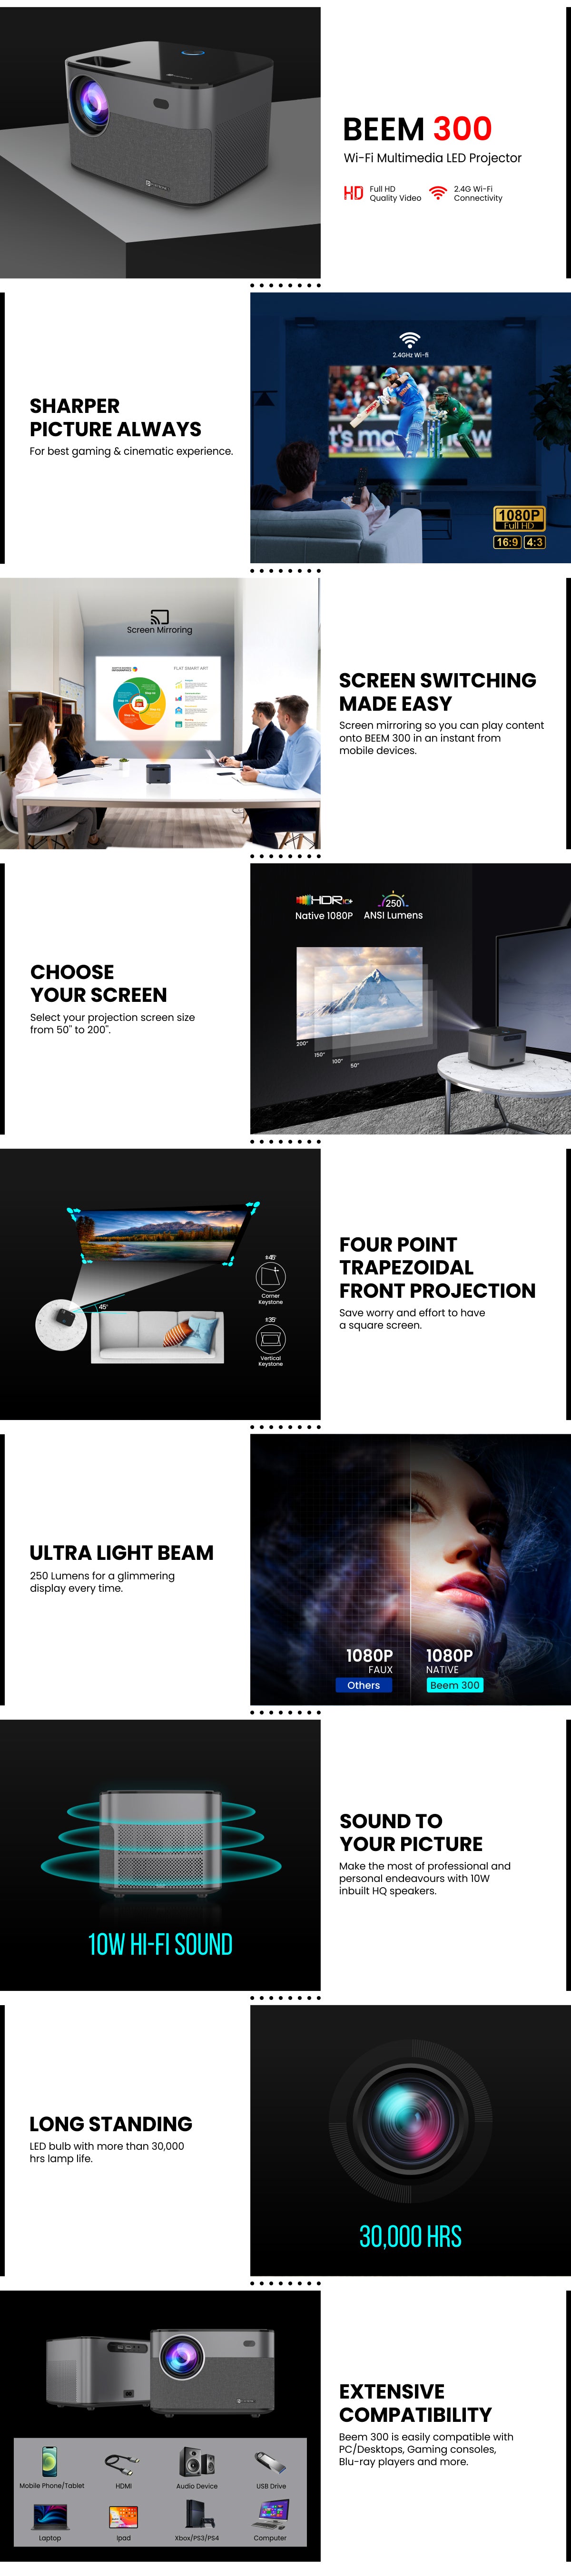 Portronics BEEM 300 Mini Projector/ bluetooth projector for best gaming & cinematic experience.